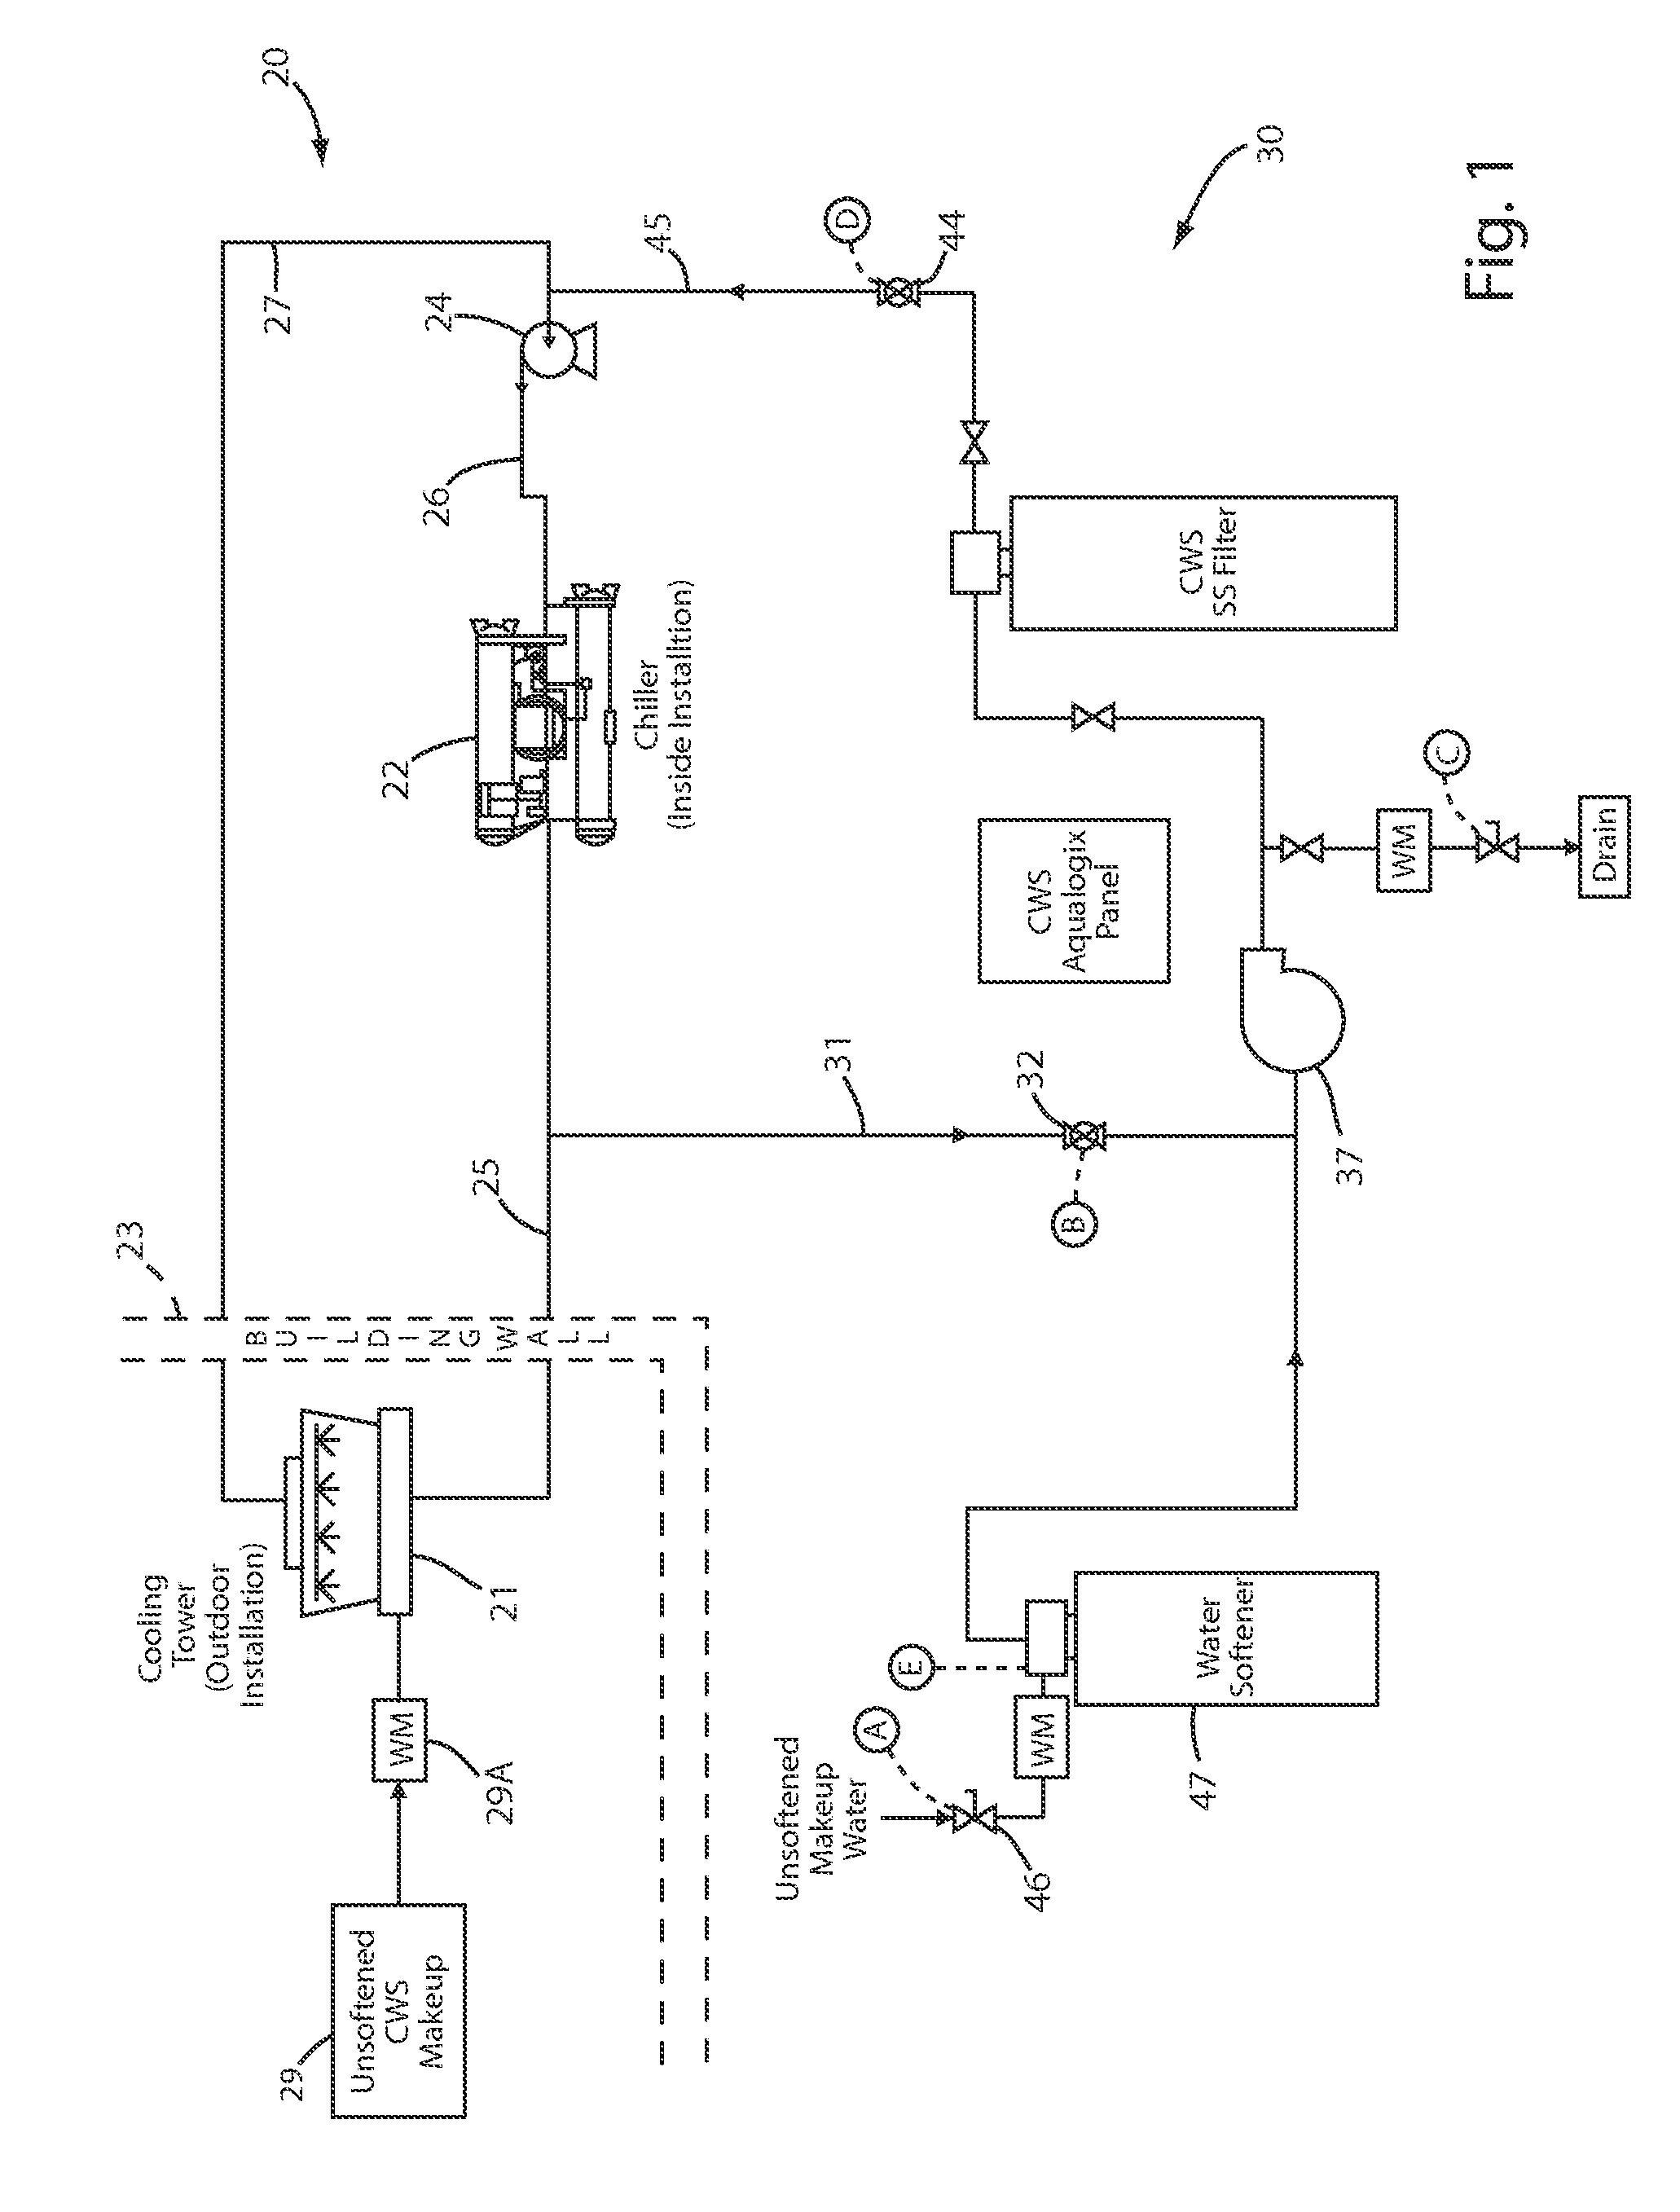 Apparatus Providing Softened Makeup Water for Cooling System